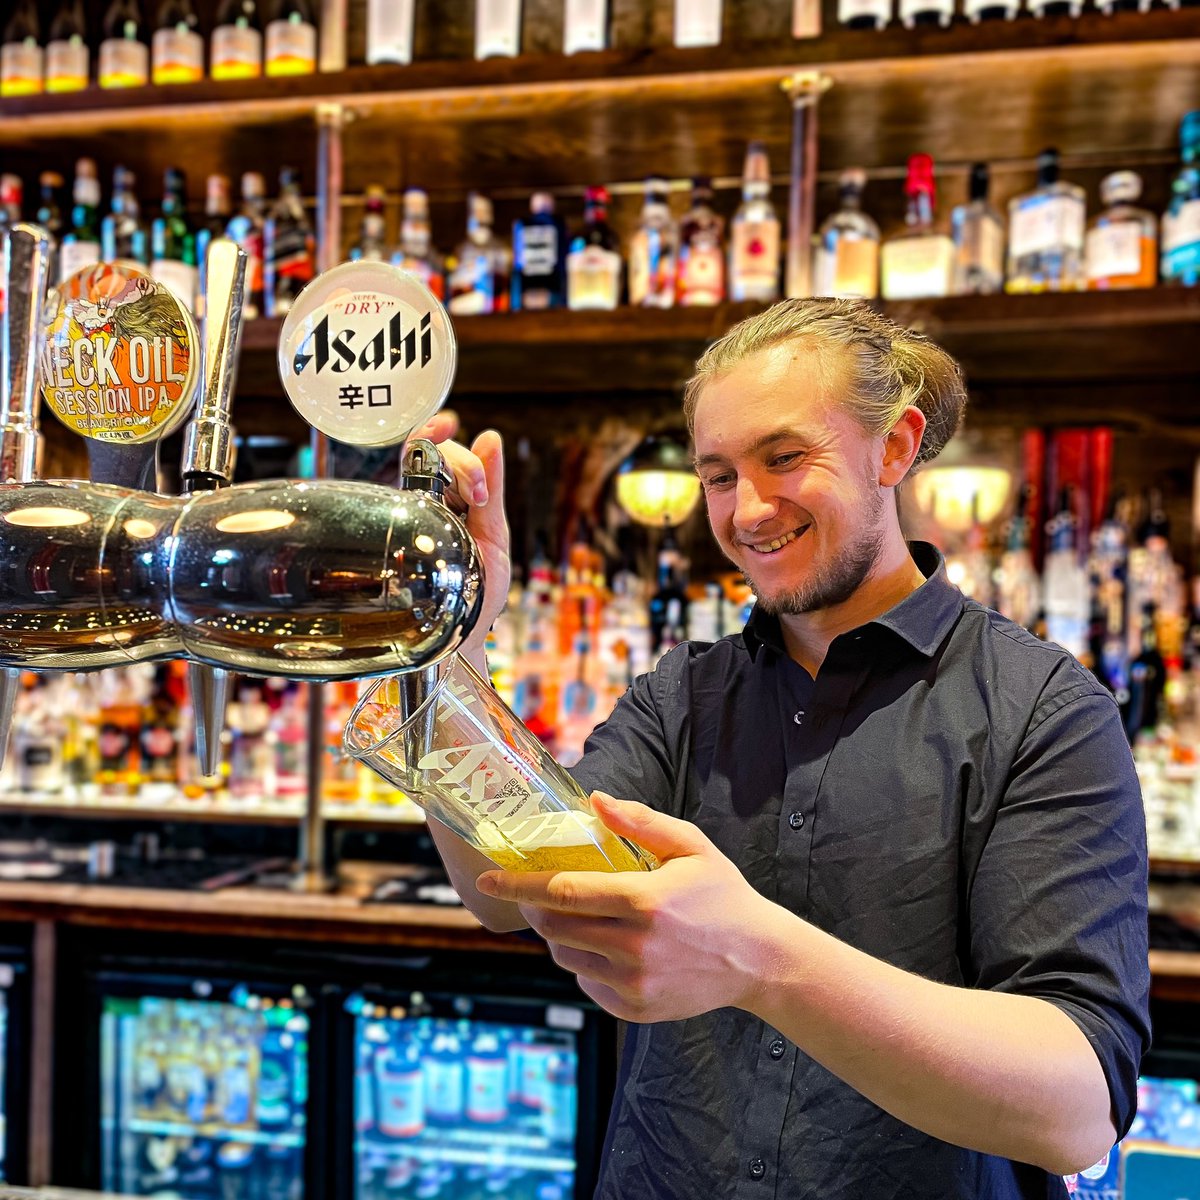 I mean at this point we all know that Thursday is the new Friday, so what are you waiting for?! Time to hop on down to the pub and treat yourself to a perfect pint from our incredible crew 🍻

#pub #youngspubs #youngspublife #youngspubspeople #youngs #londonpub #londonpubs #pint